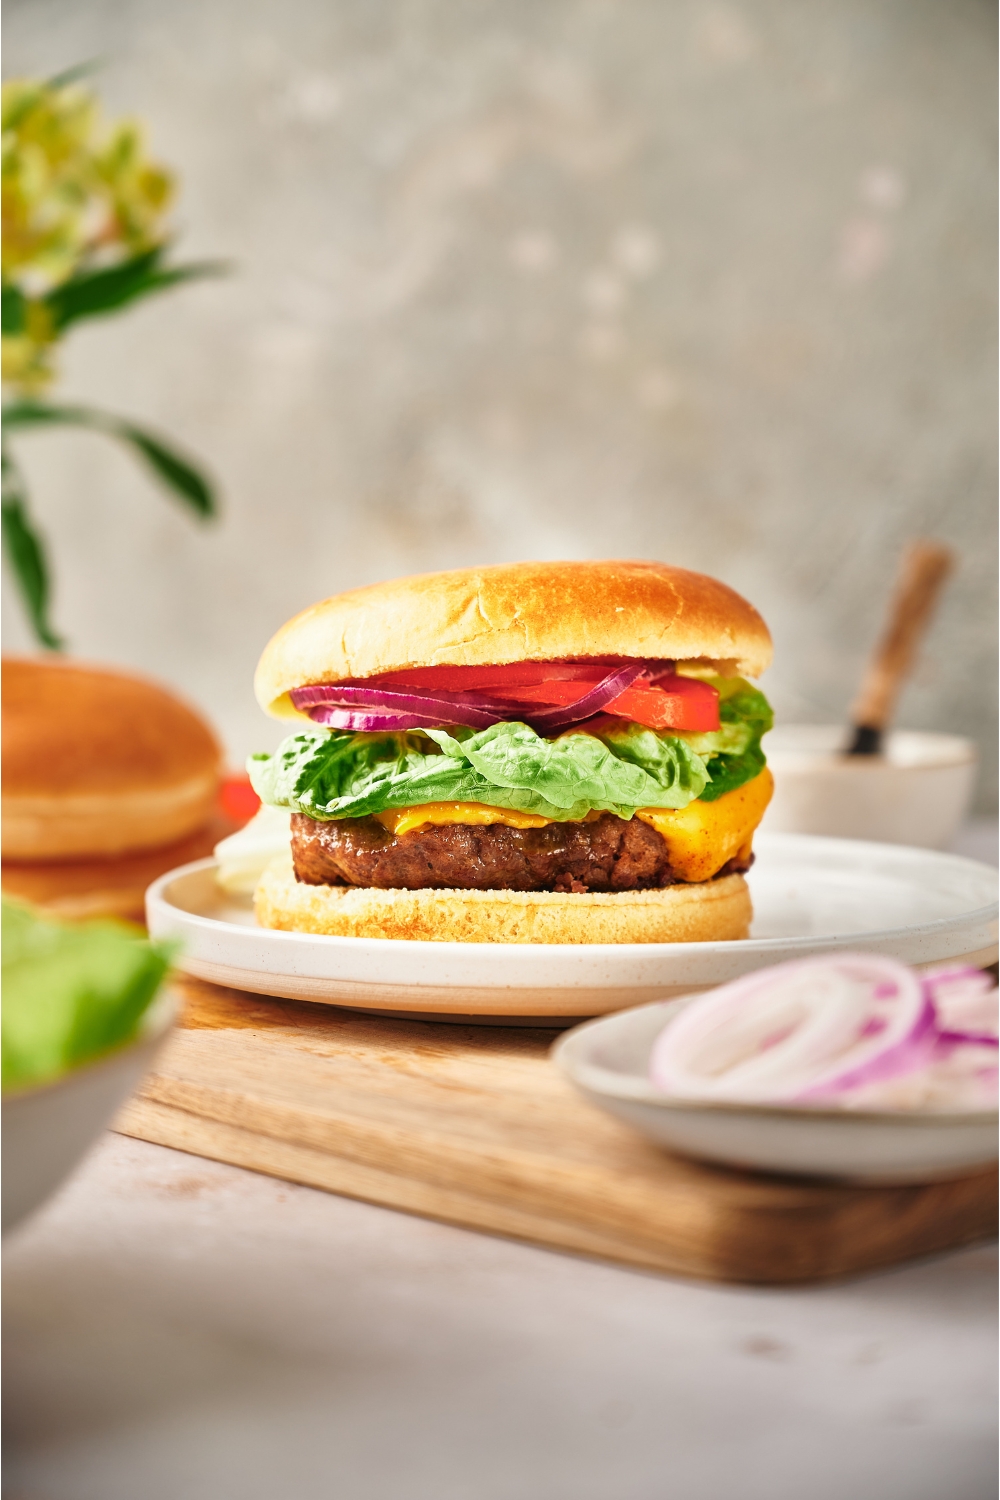 A cheeseburger with red onion, lettuce, and tomato on it. The burger is on a white plate atop a wood cutting board alongside a plate of sliced onions.